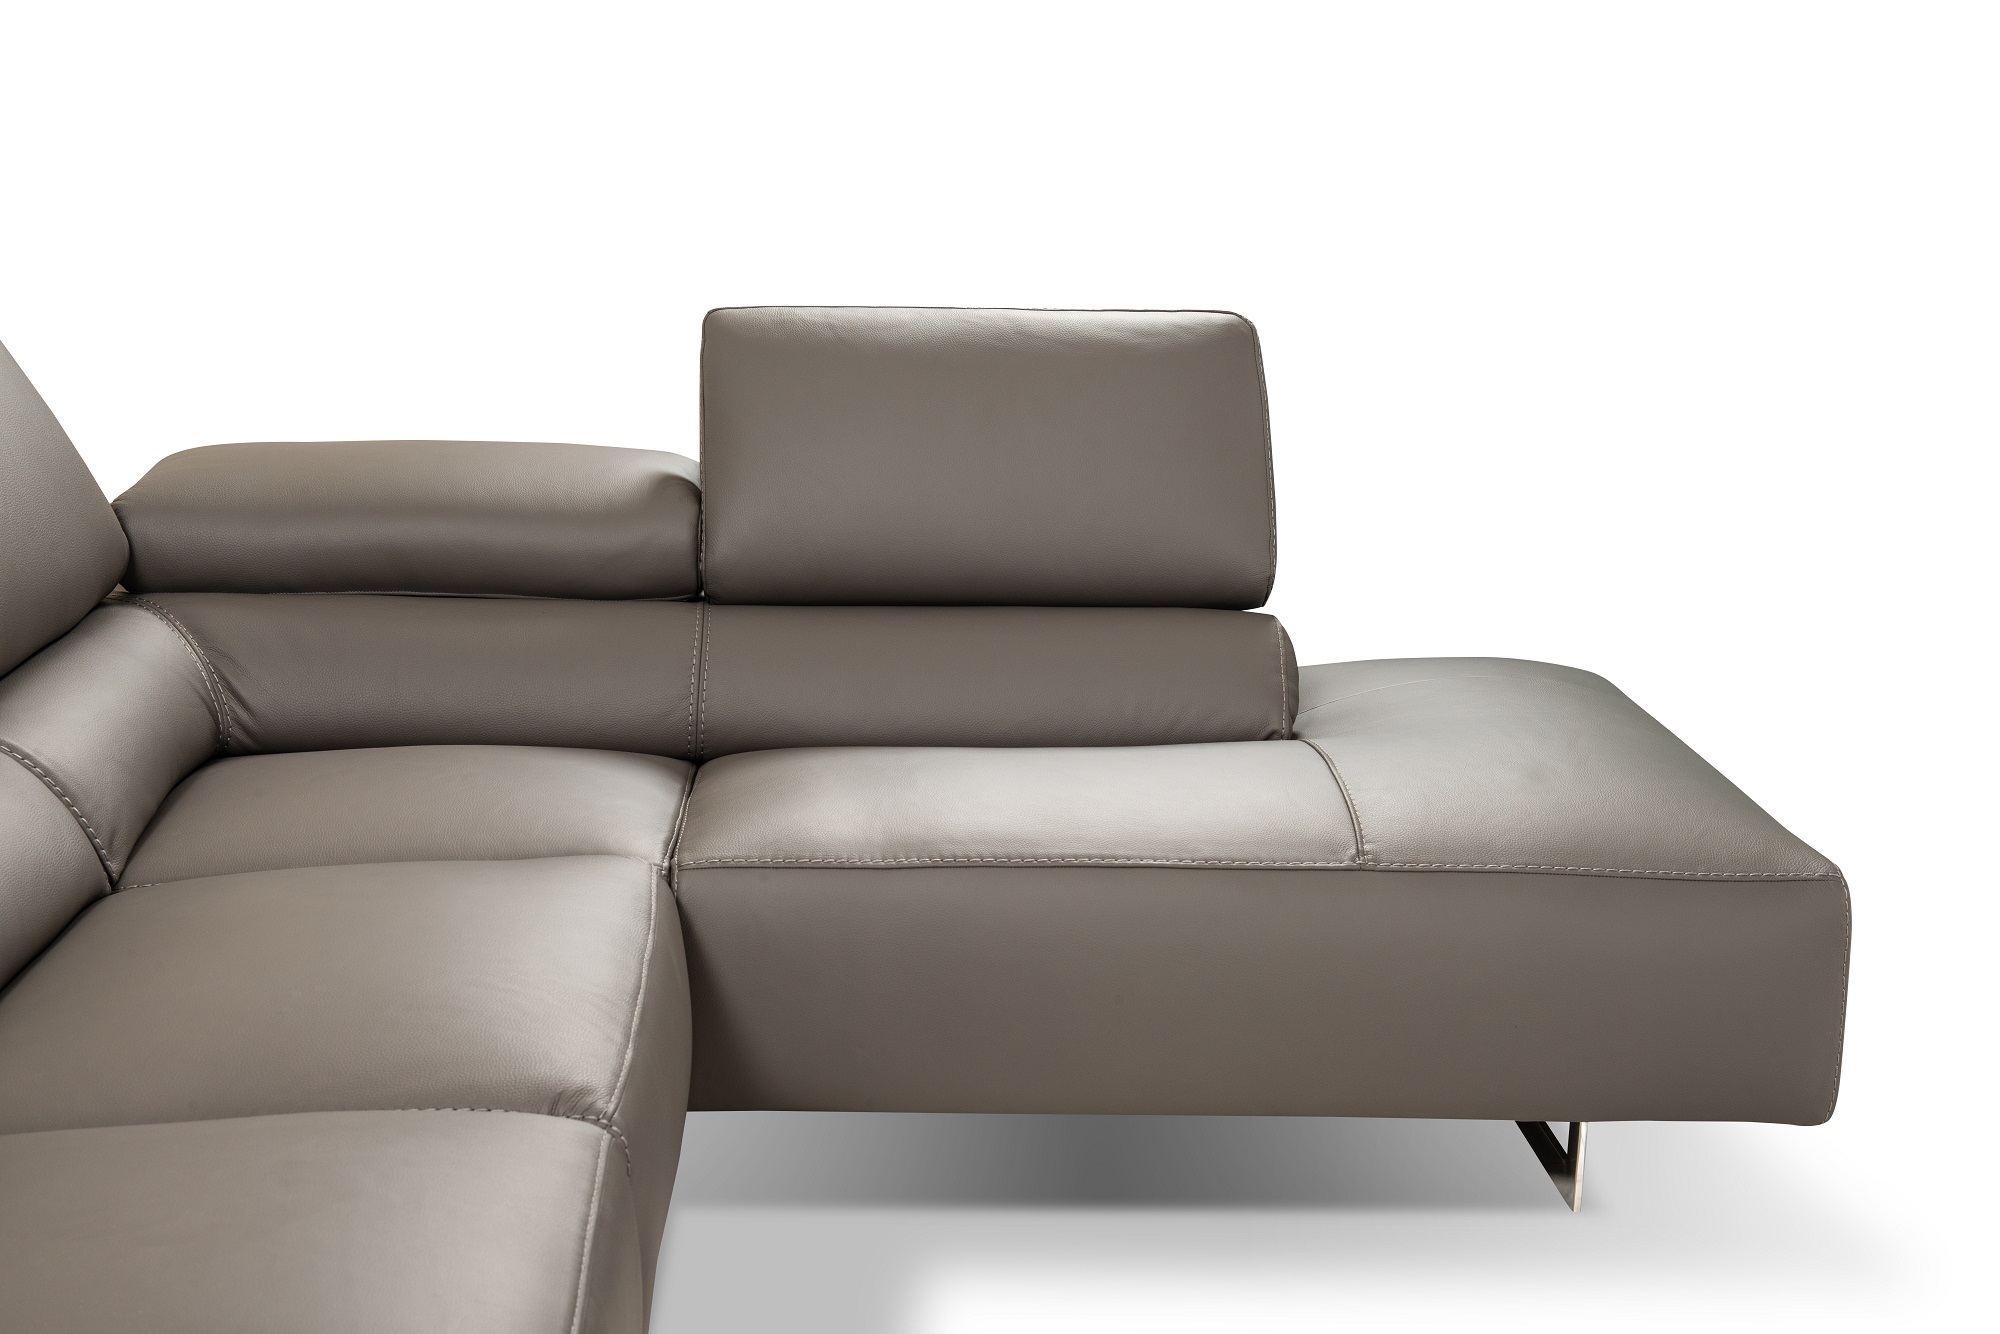 Classic Leather Sectional Sofa Upholstered In Italian Leather - Click Image to Close